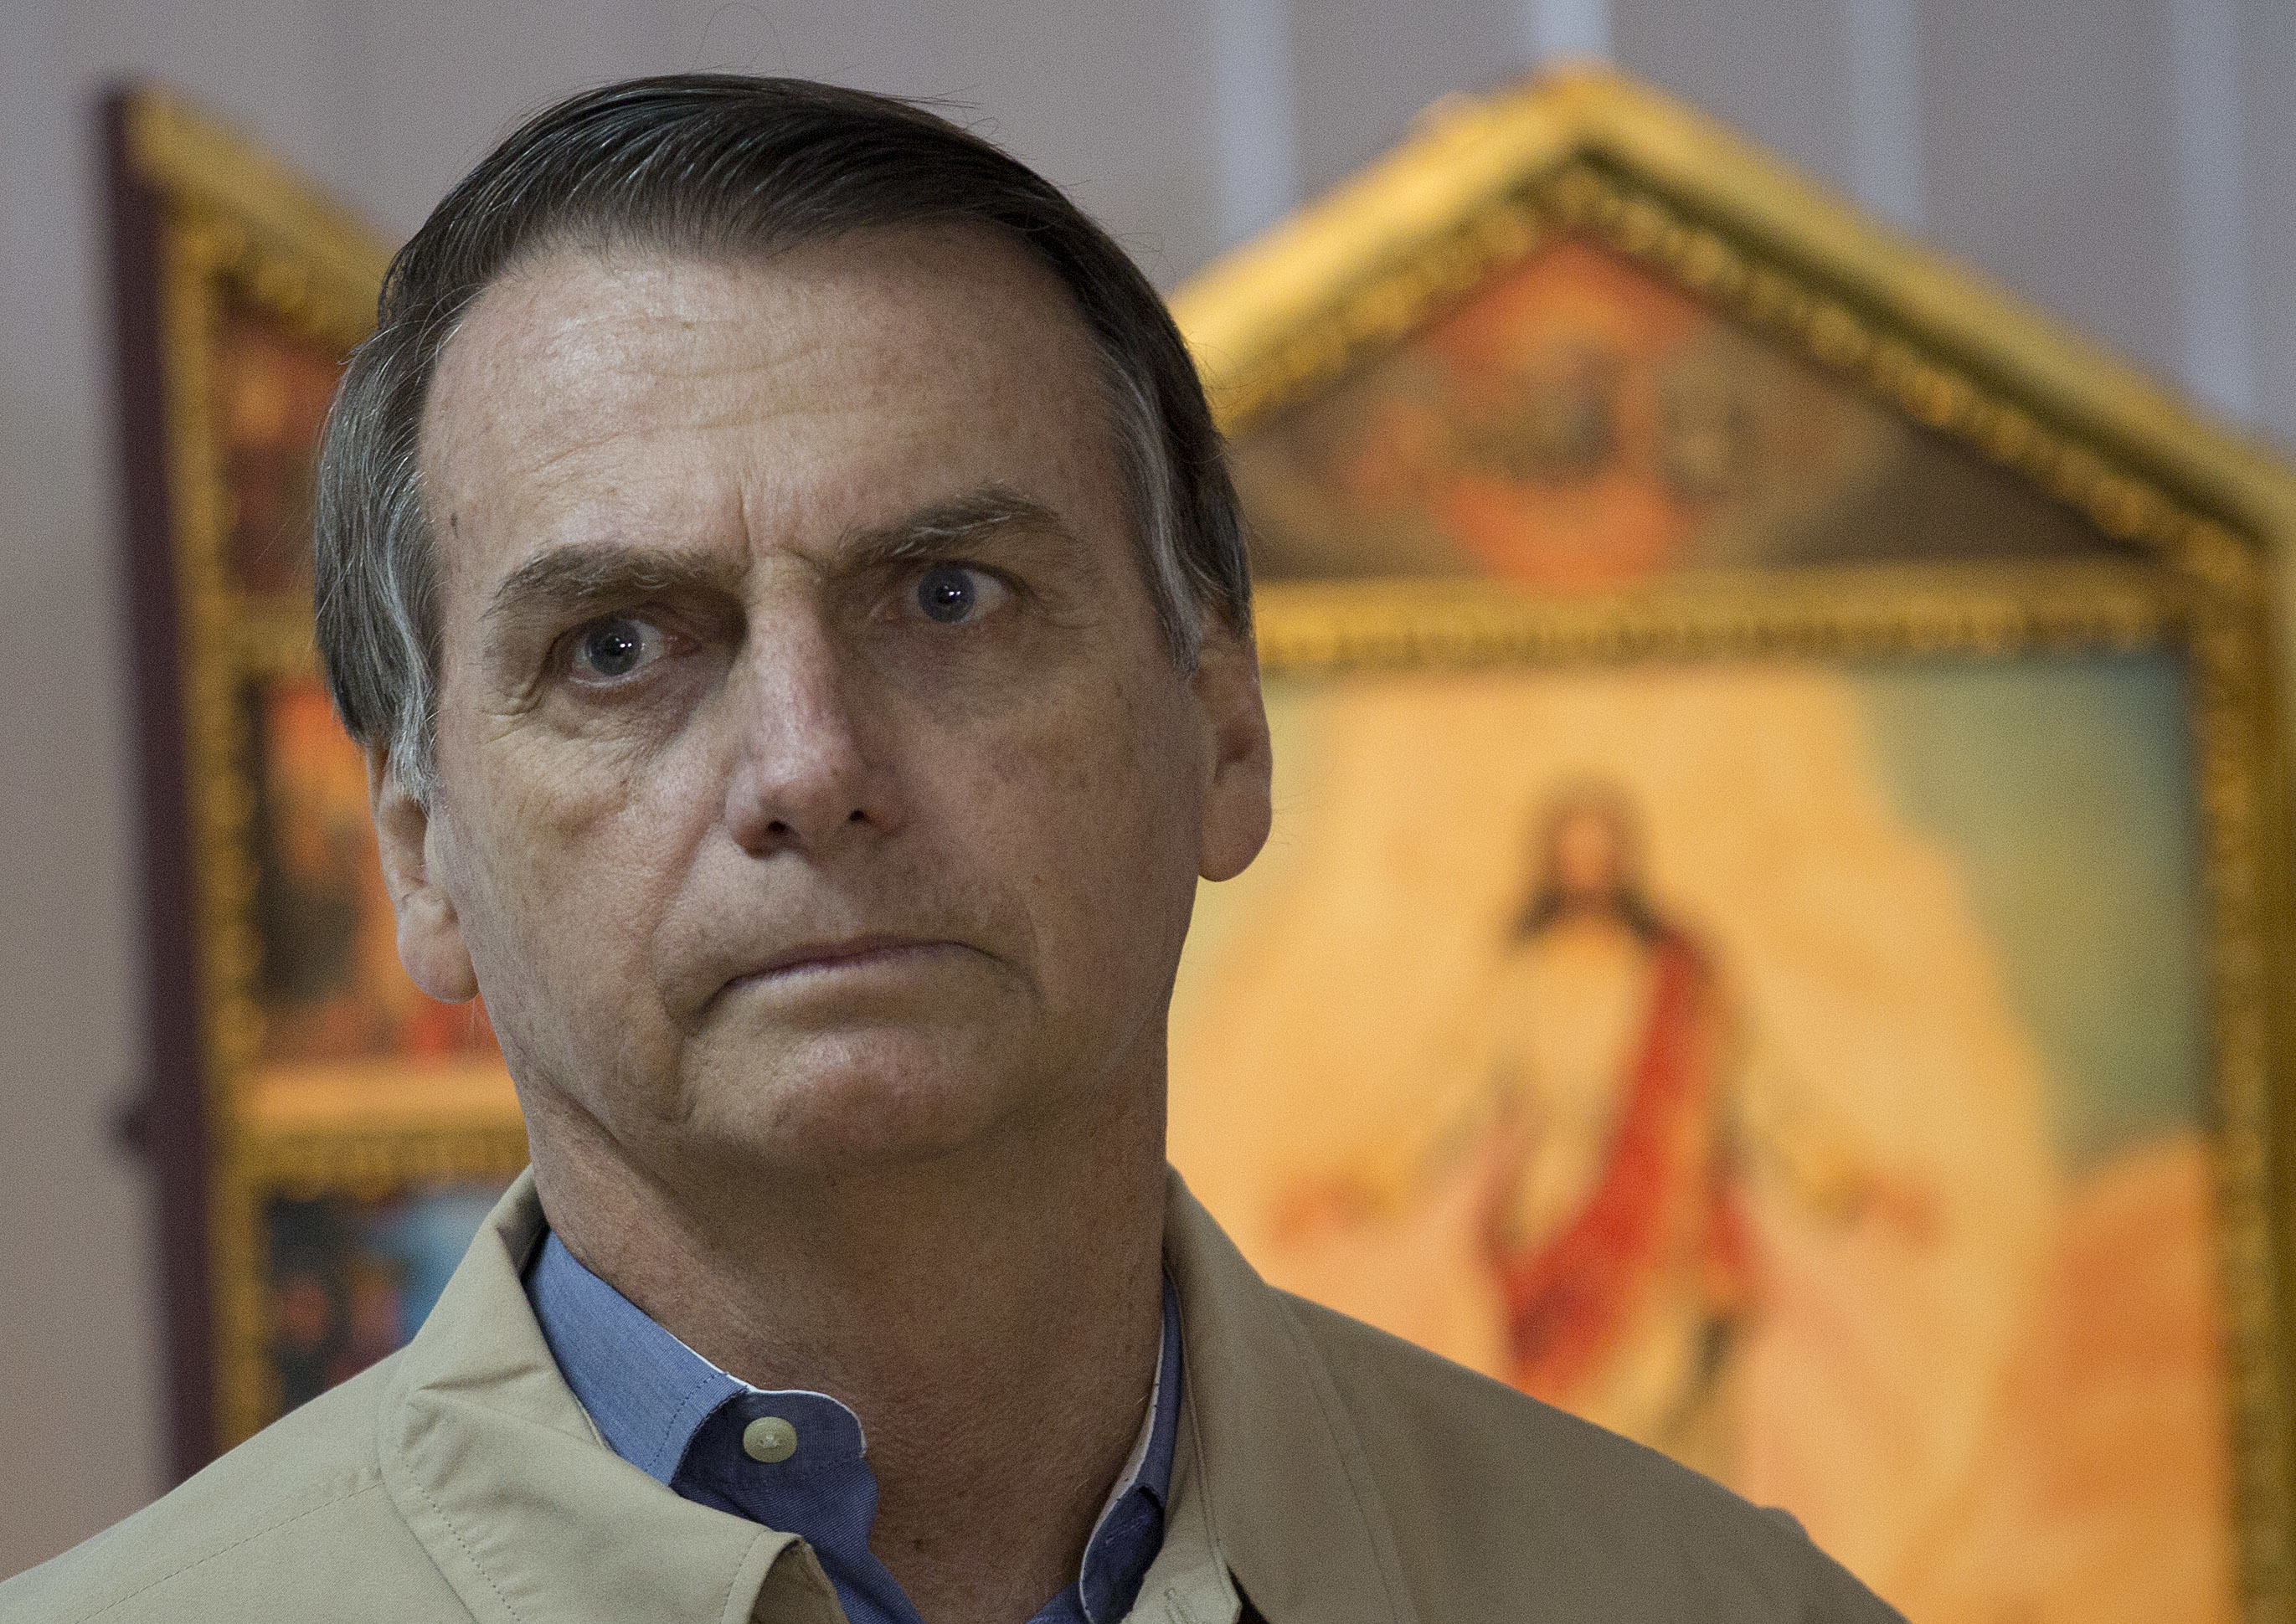 Presidential candidate Jair Bolsonaro poses for a photo during a meeting with Rio de Janeiro's Archbishop Dom Orani Tempesta in Rio de Janeiro, Brazil, Wednesday, Oct. 17, 2018. Bolsonaro won the first round of the presidential election Oct. 7 with 46 percent of the vote, but since he failed to top 50 percent, he is in a second-round ballot on Oct. 28. (AP Photo/Silvia Izquierdo)